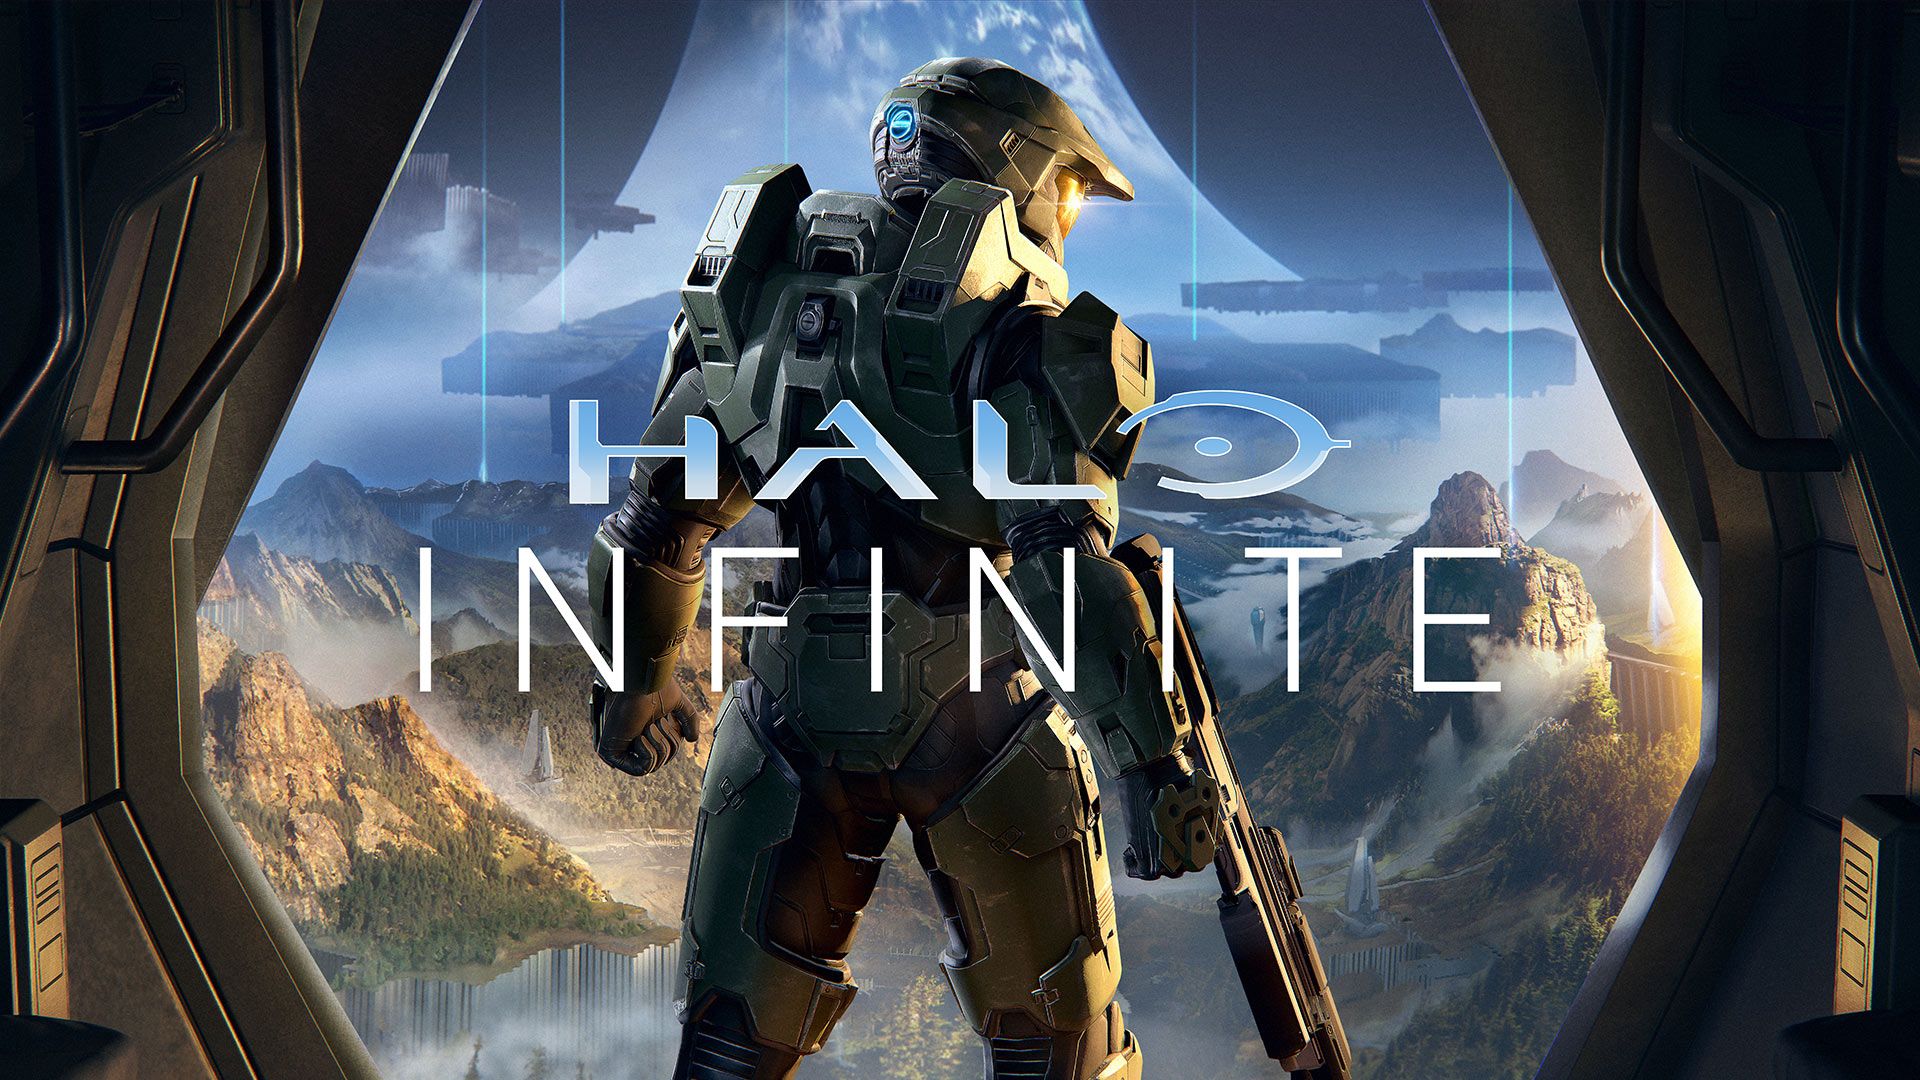 Halo Infinite for Xbox One and Windows 10